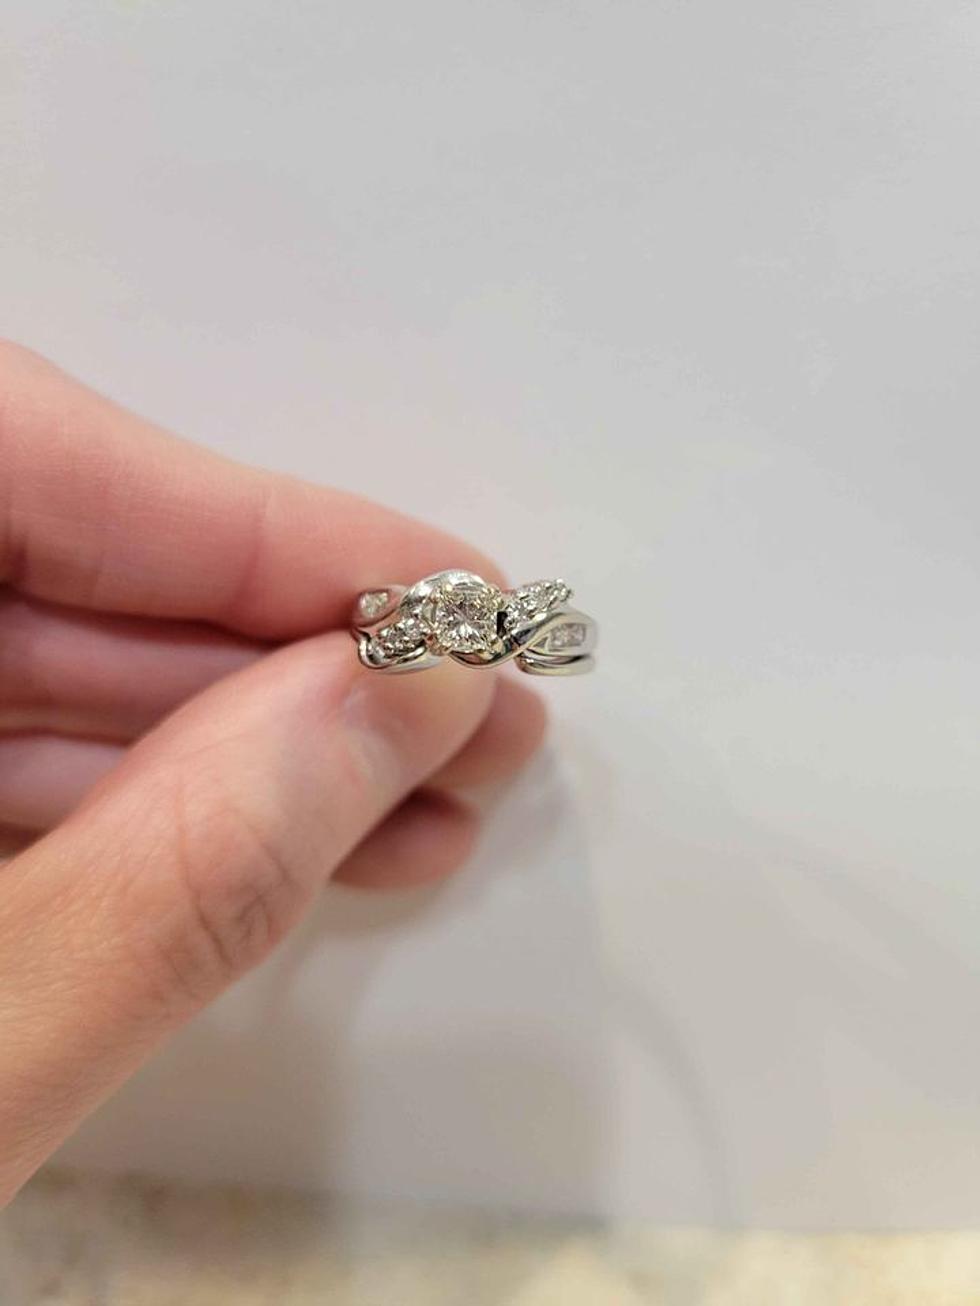 Woman Selling 'Totally Not Cursed' Engagement Ring'